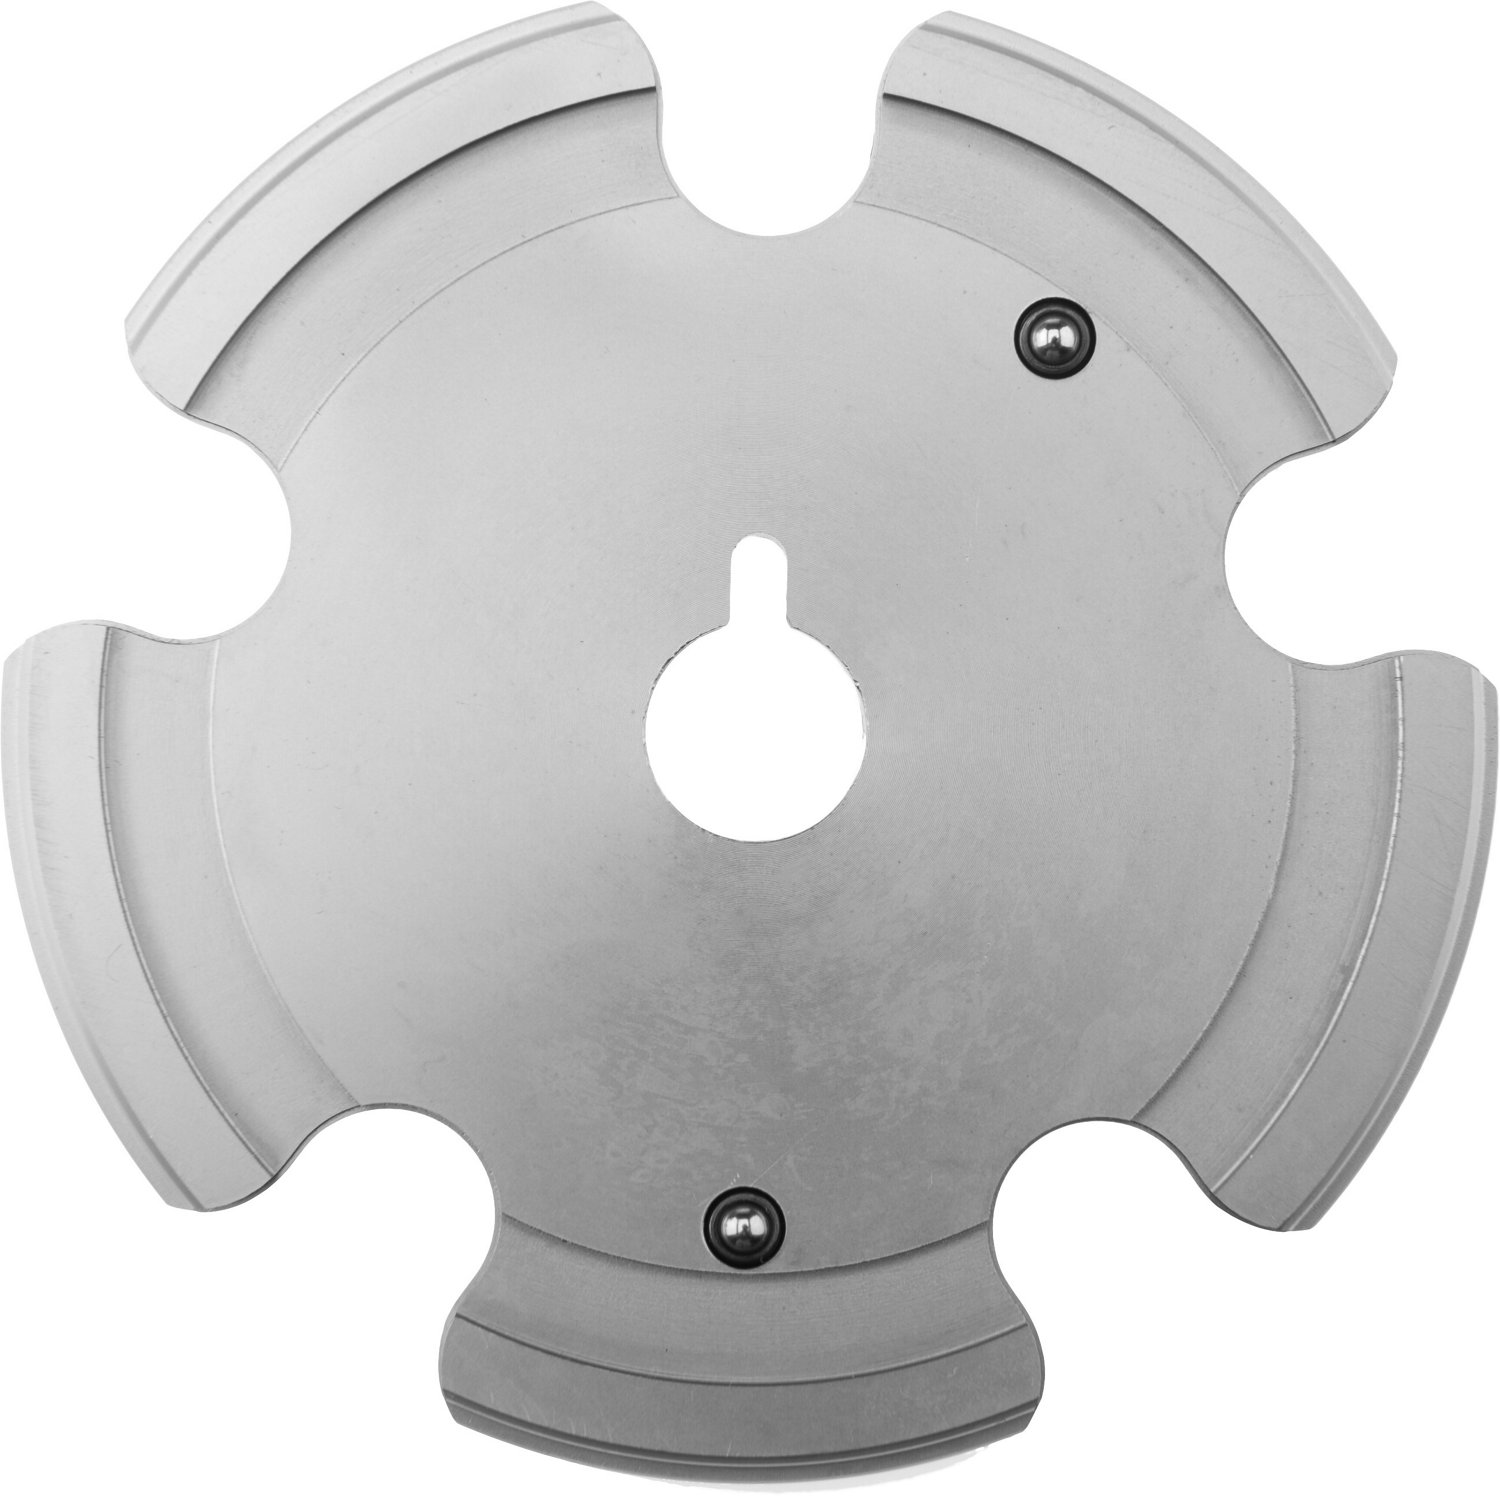 Hornady #45 Shell Plate for Lock-N-Load® AP™ and Pro-Jector